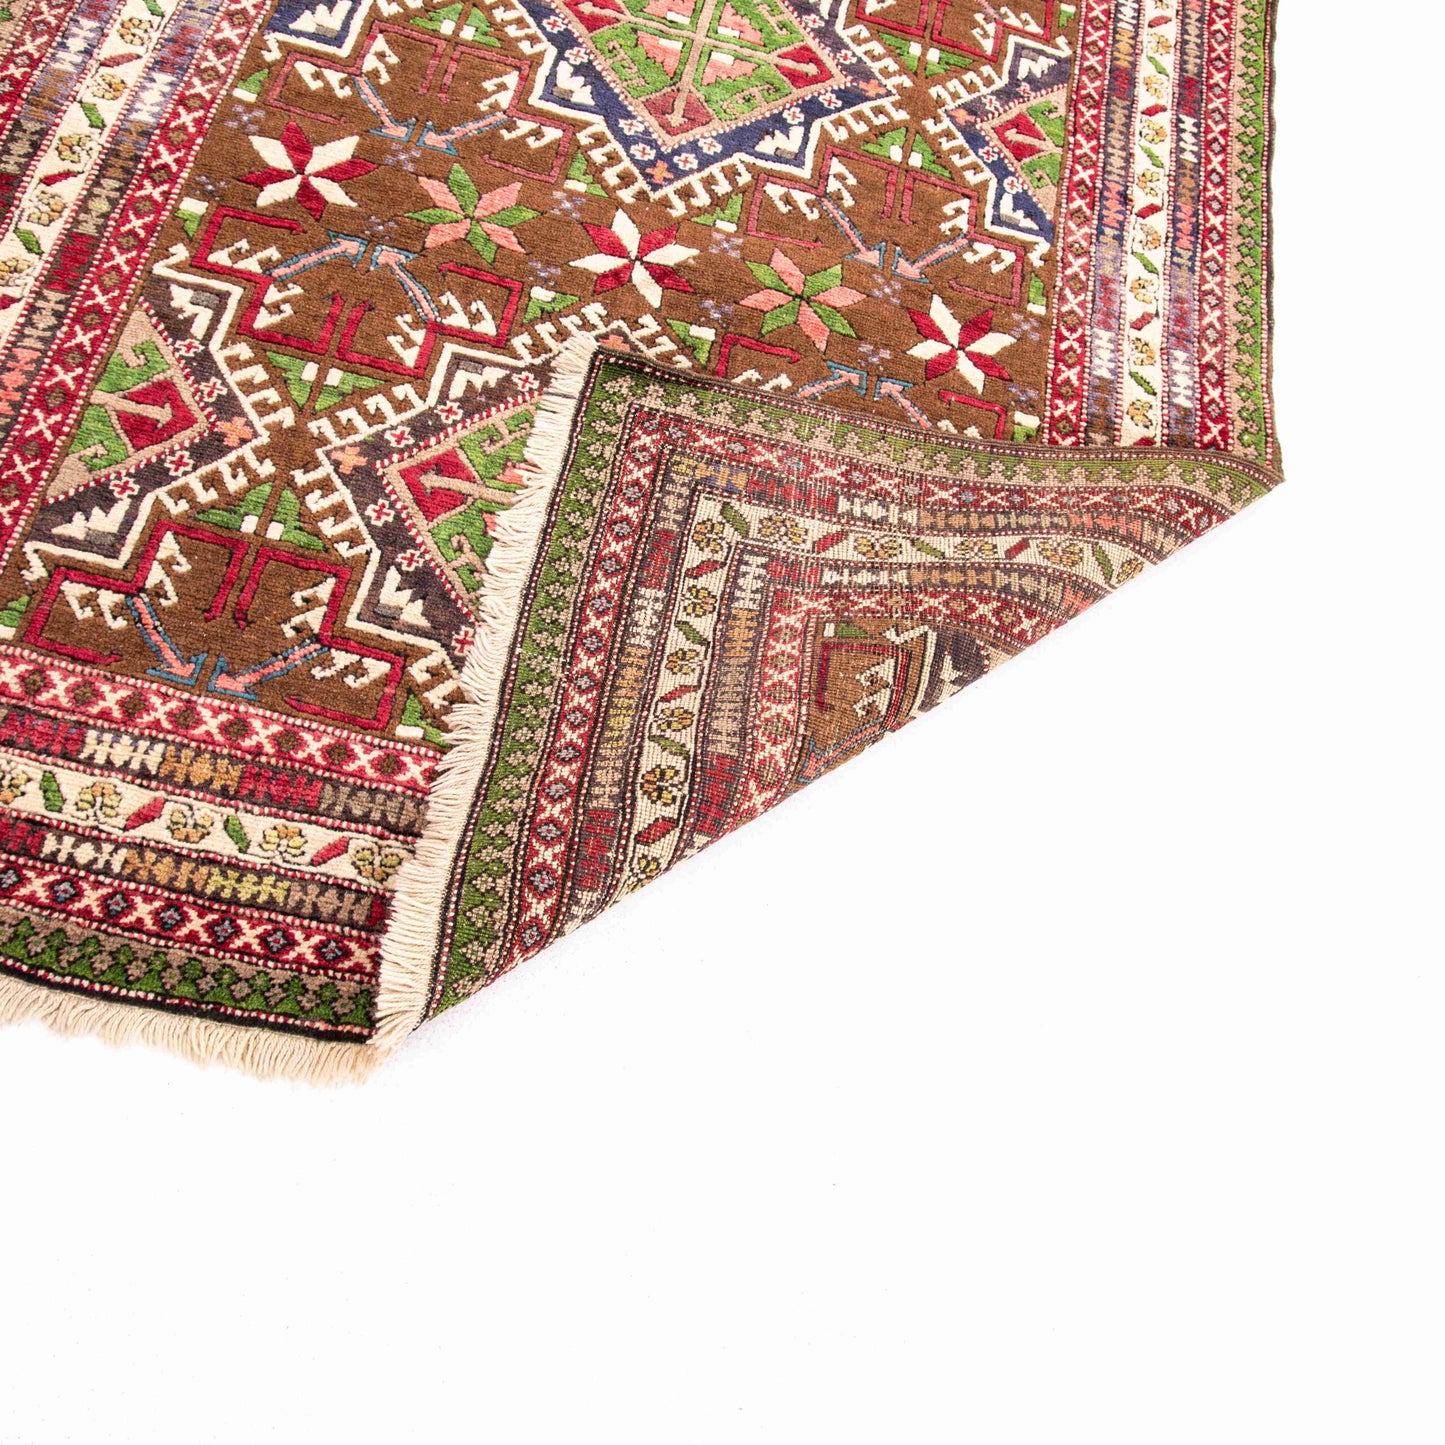 Oriental Rug Anatolian Hand Knotted Wool On Wool 140 X 170 Cm - 4' 8'' X 5' 7'' Brown C005 ER01